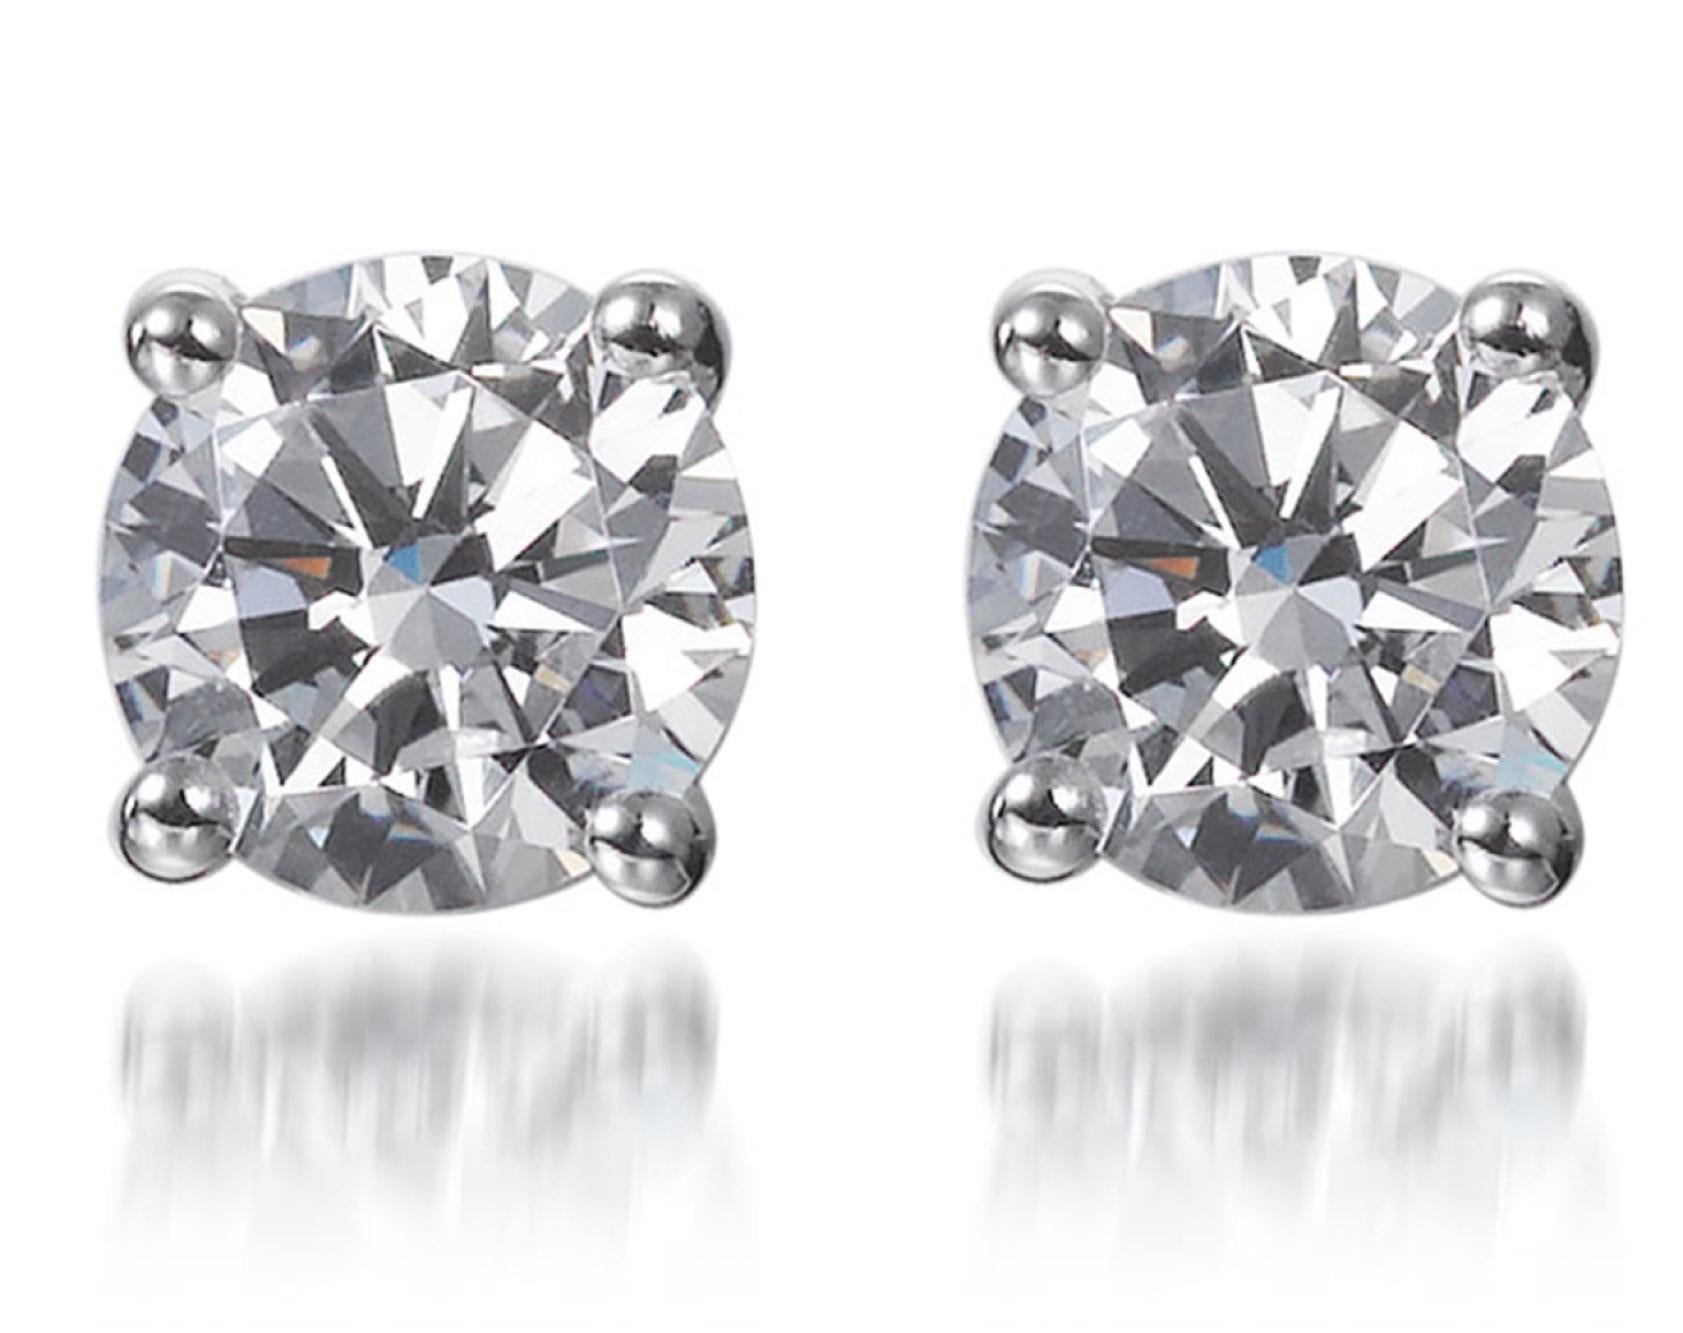 These classy 2.60ct cubic zirconia classic solitaire stud earrings, crafted in rhodium plated silver each feature a single 1.30 carat round brilliant cut cubic zirconia, elegantly set in a simple four-claw setting.

Designed to be worn from desk to